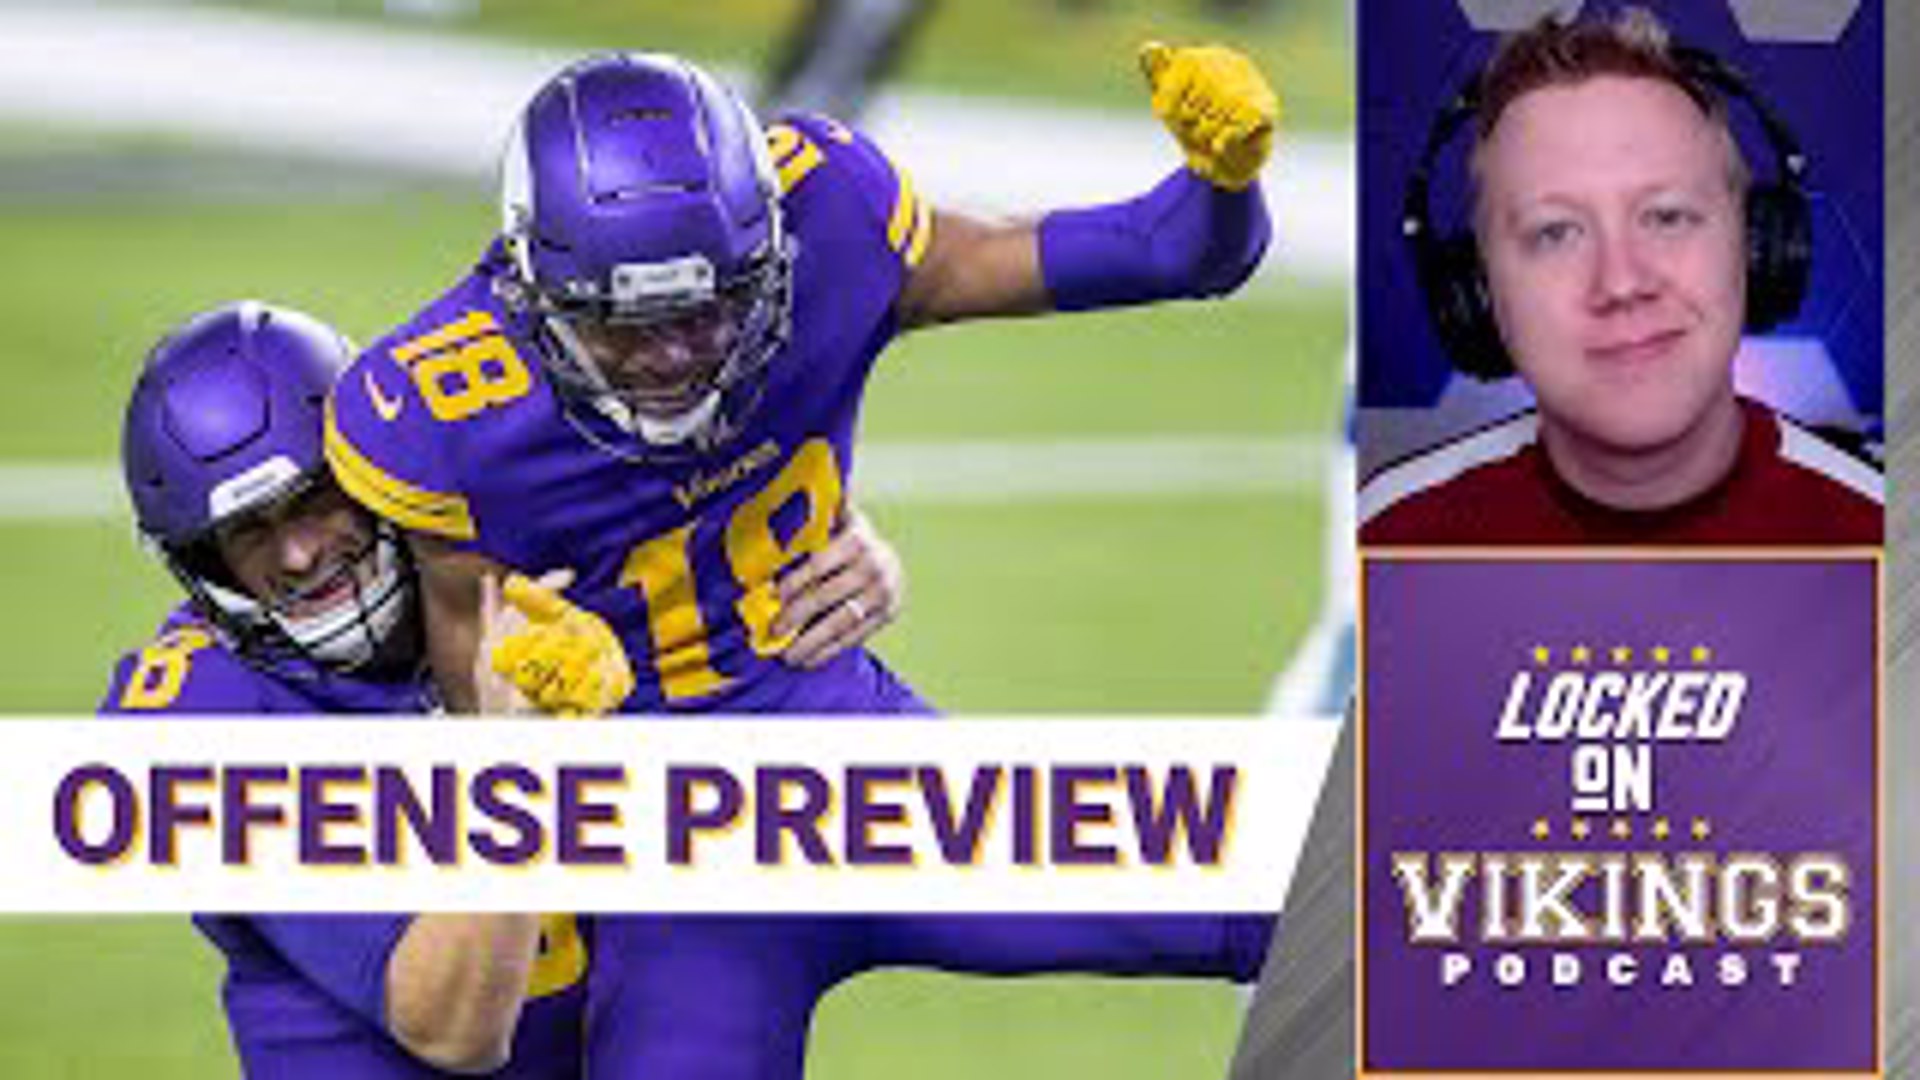 The Minnesota Vikings play the Green Bay Packers in one week, so it's time to cram. Let's review what we know about the 2022 Vikings' offense.